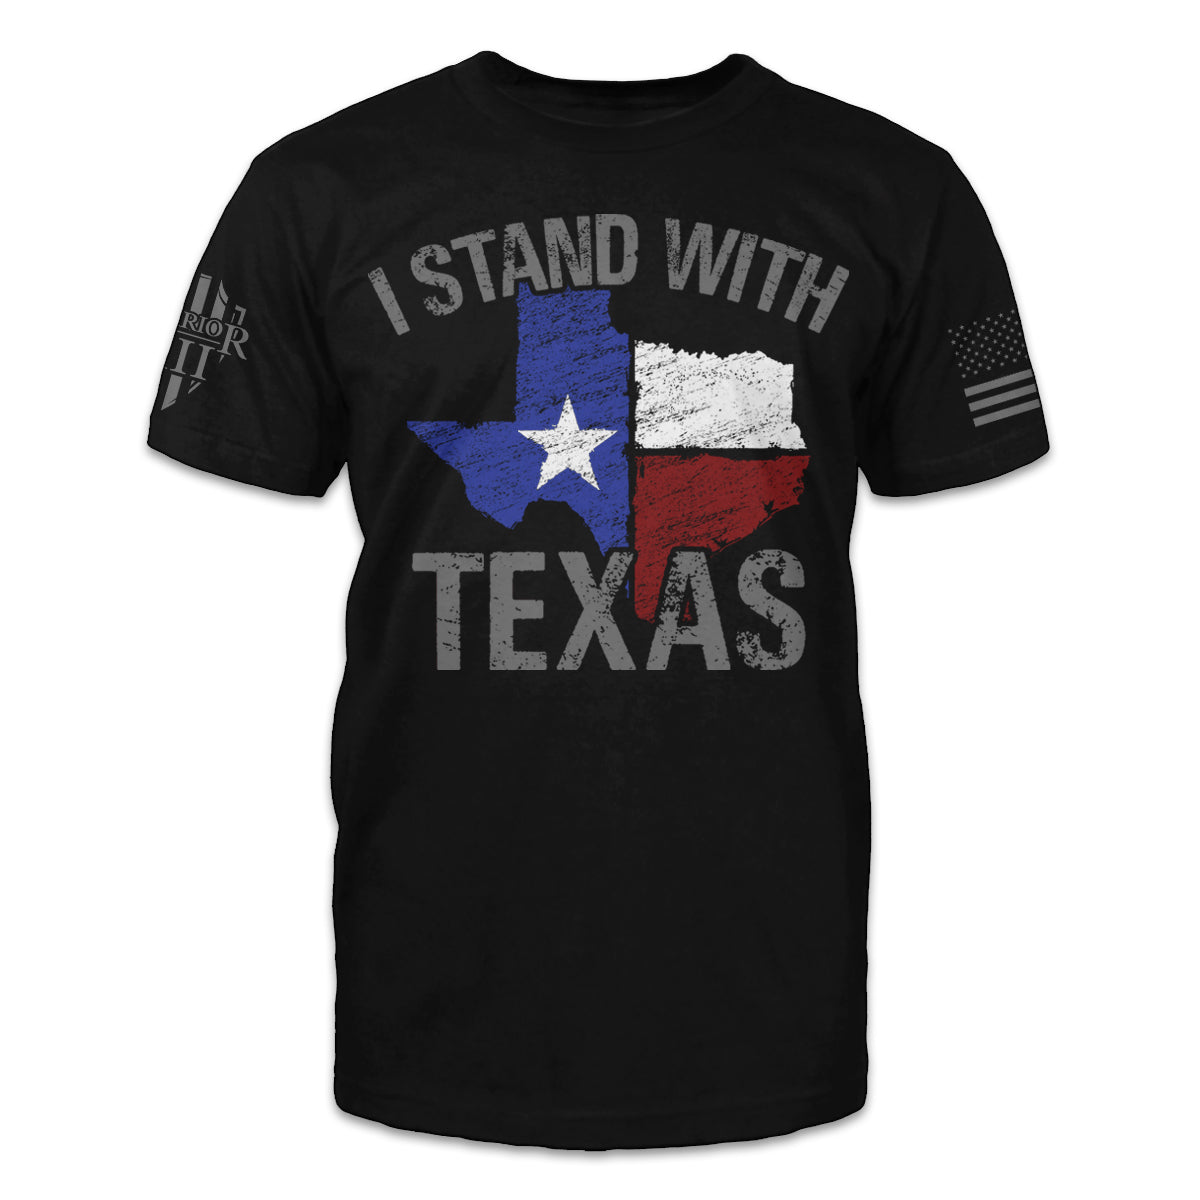 A black t-shirt with an image on the front of Texas with a Texas flag in it and words around it, "I stand with Texas".